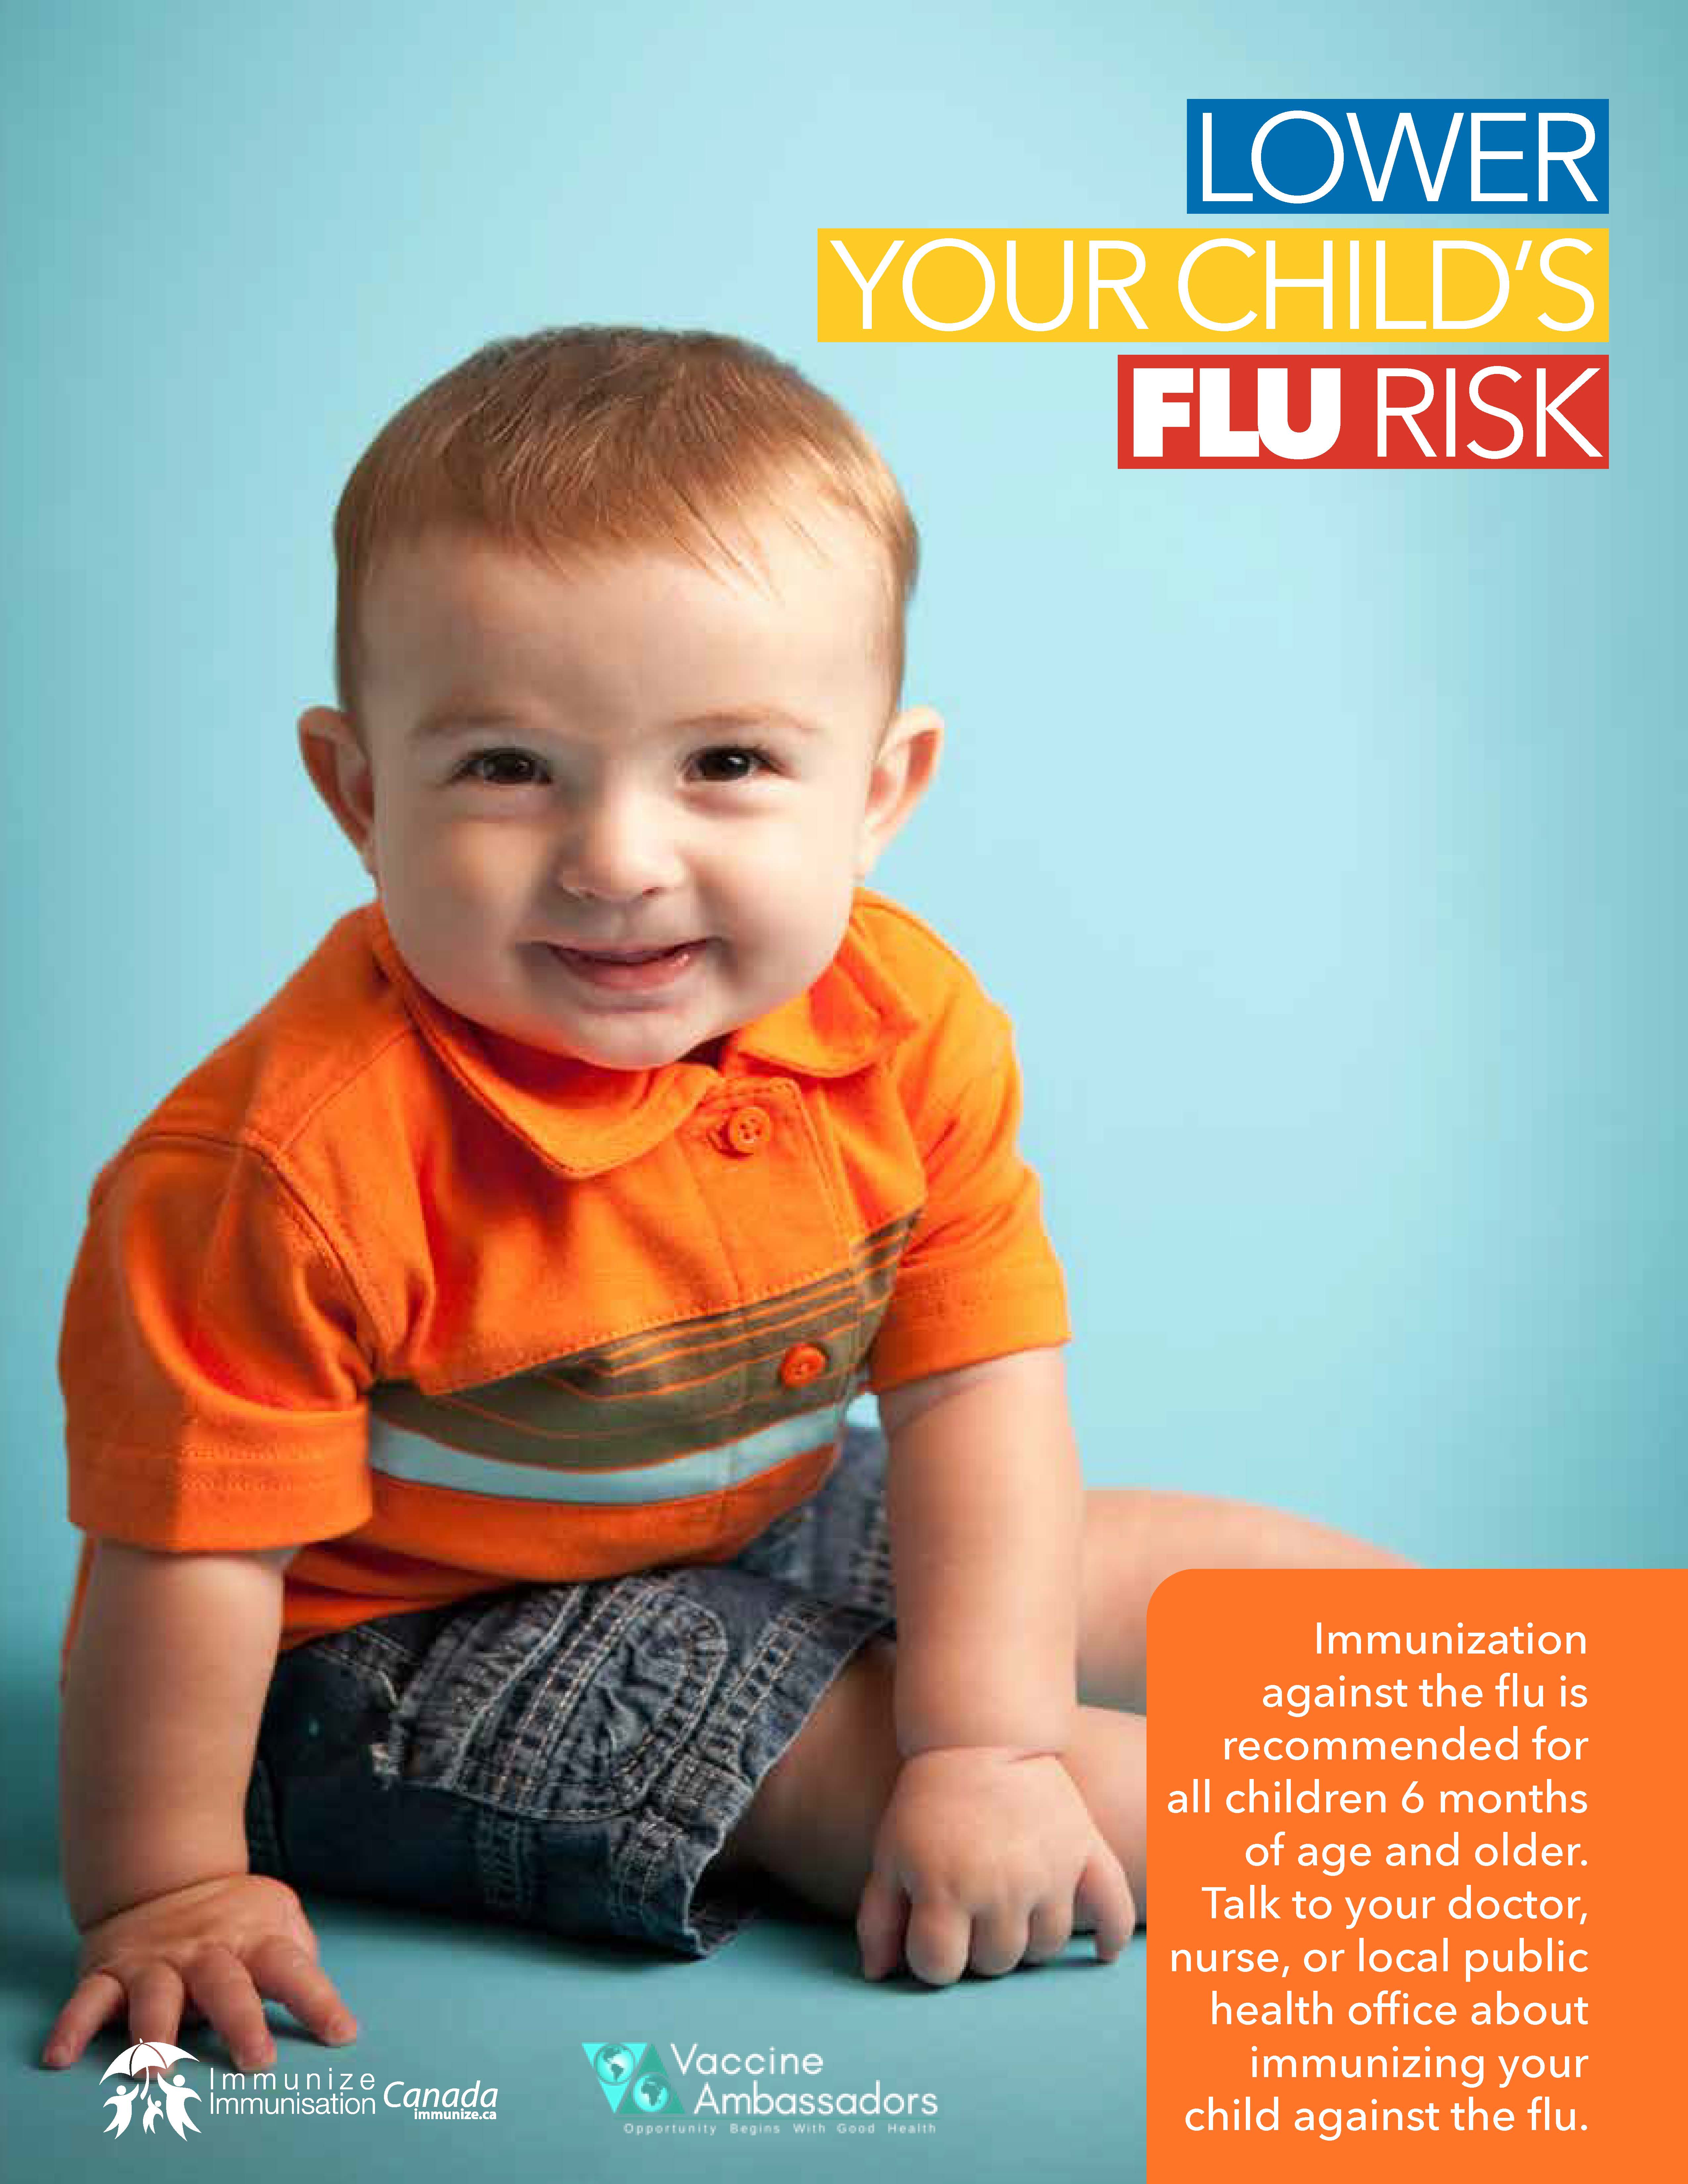 Lower your child's flu risk